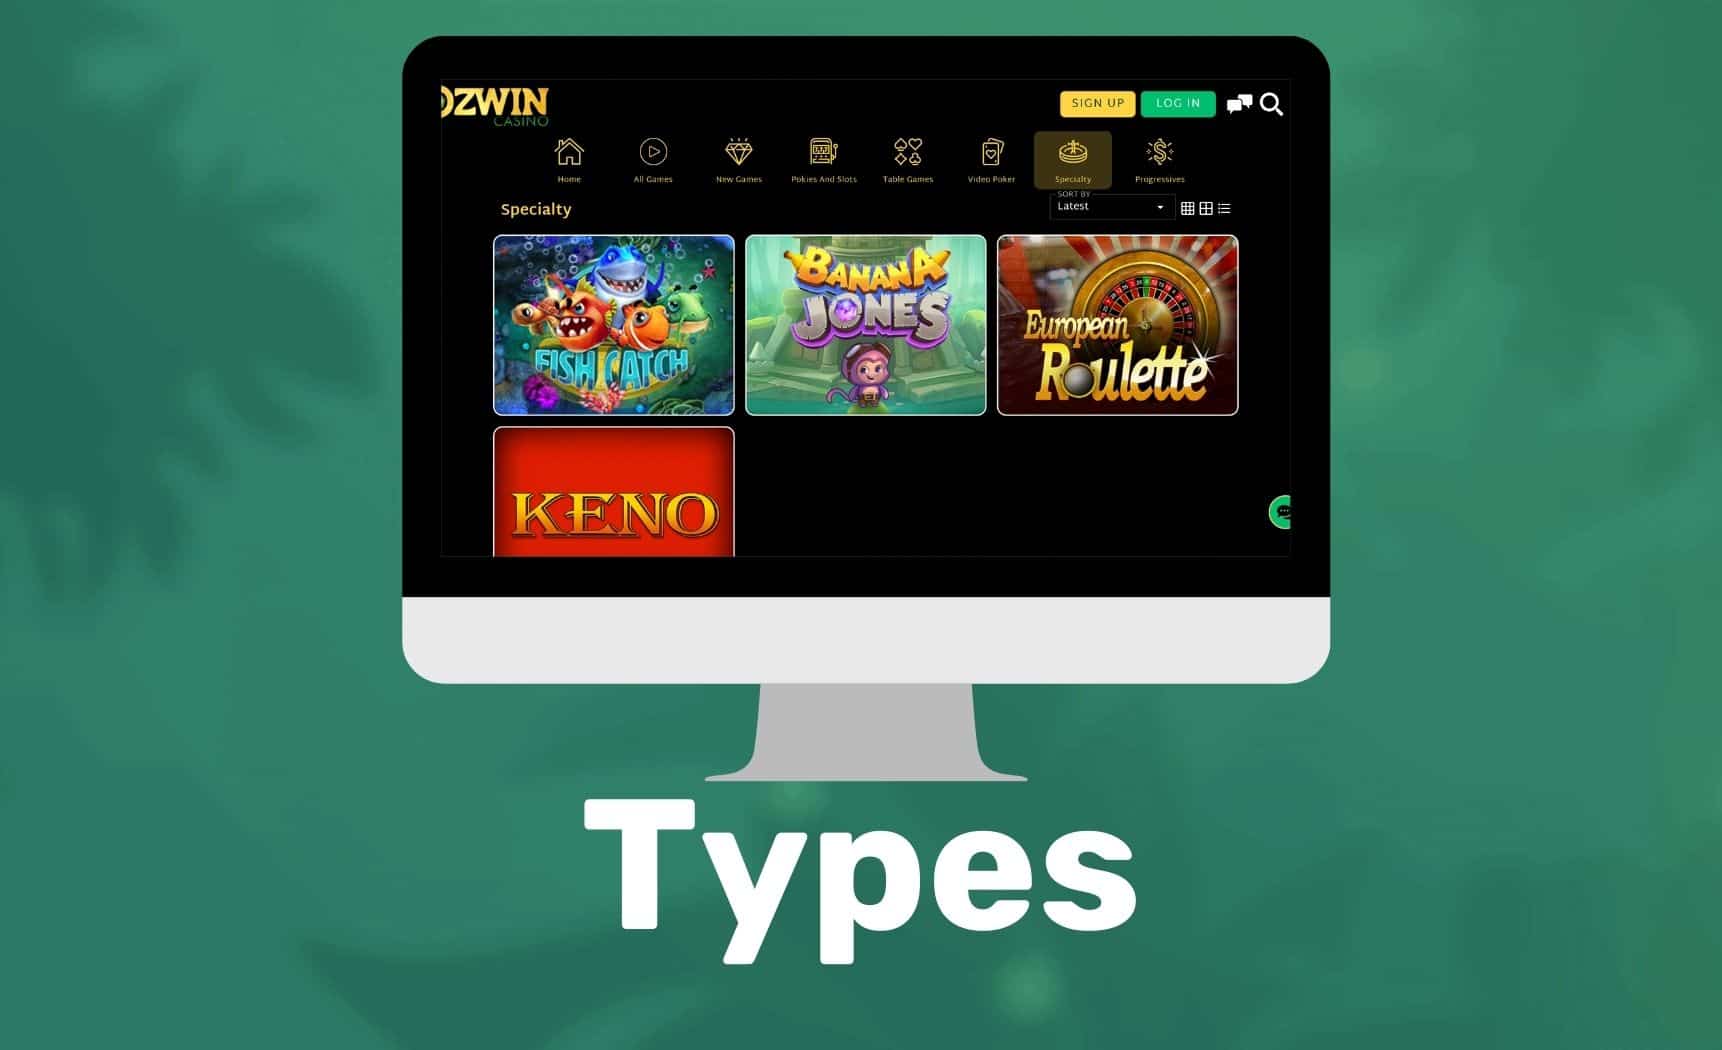 Ozwin Casino specialty games types review